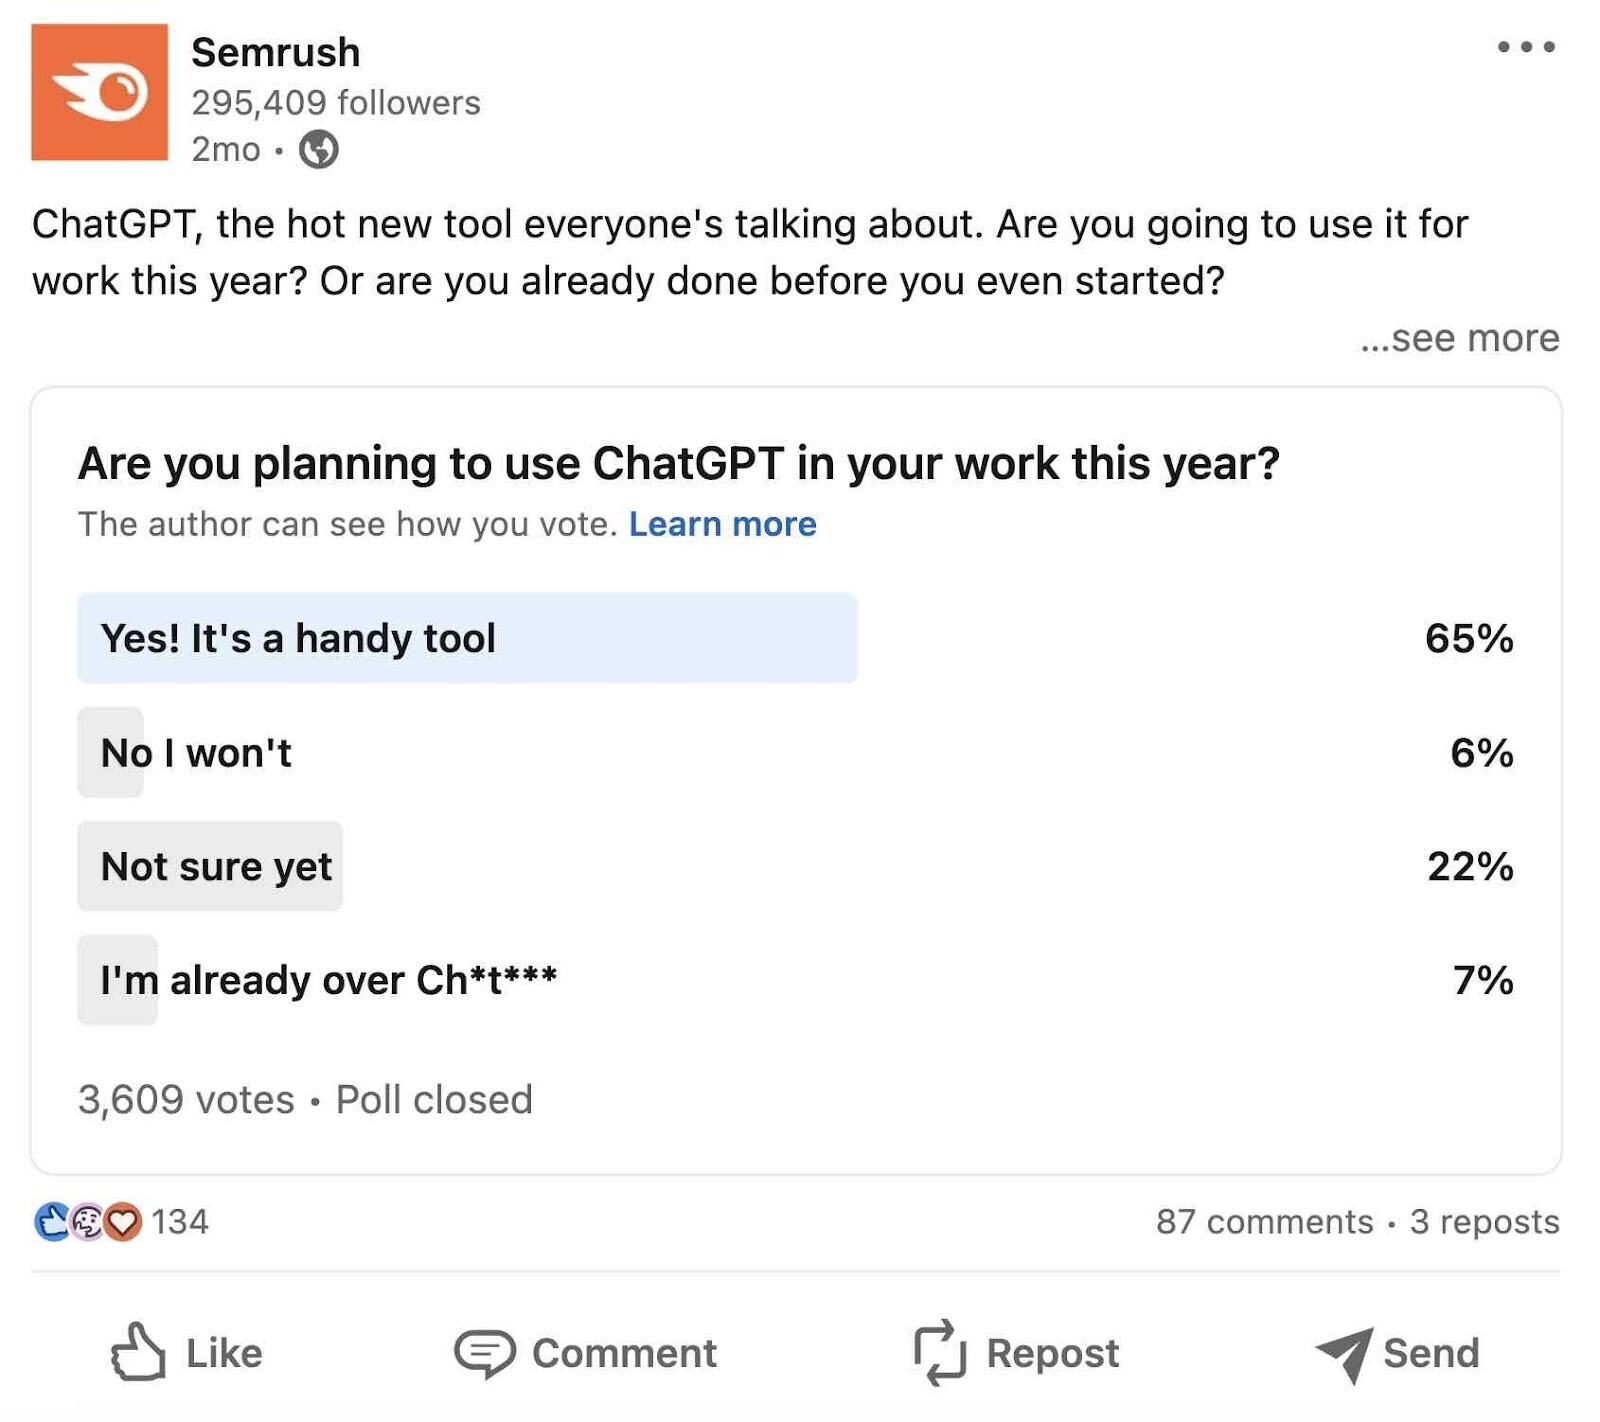 Semrush's poll on LinkedIn asking users if they are planning to use ChatGPT in their work this year